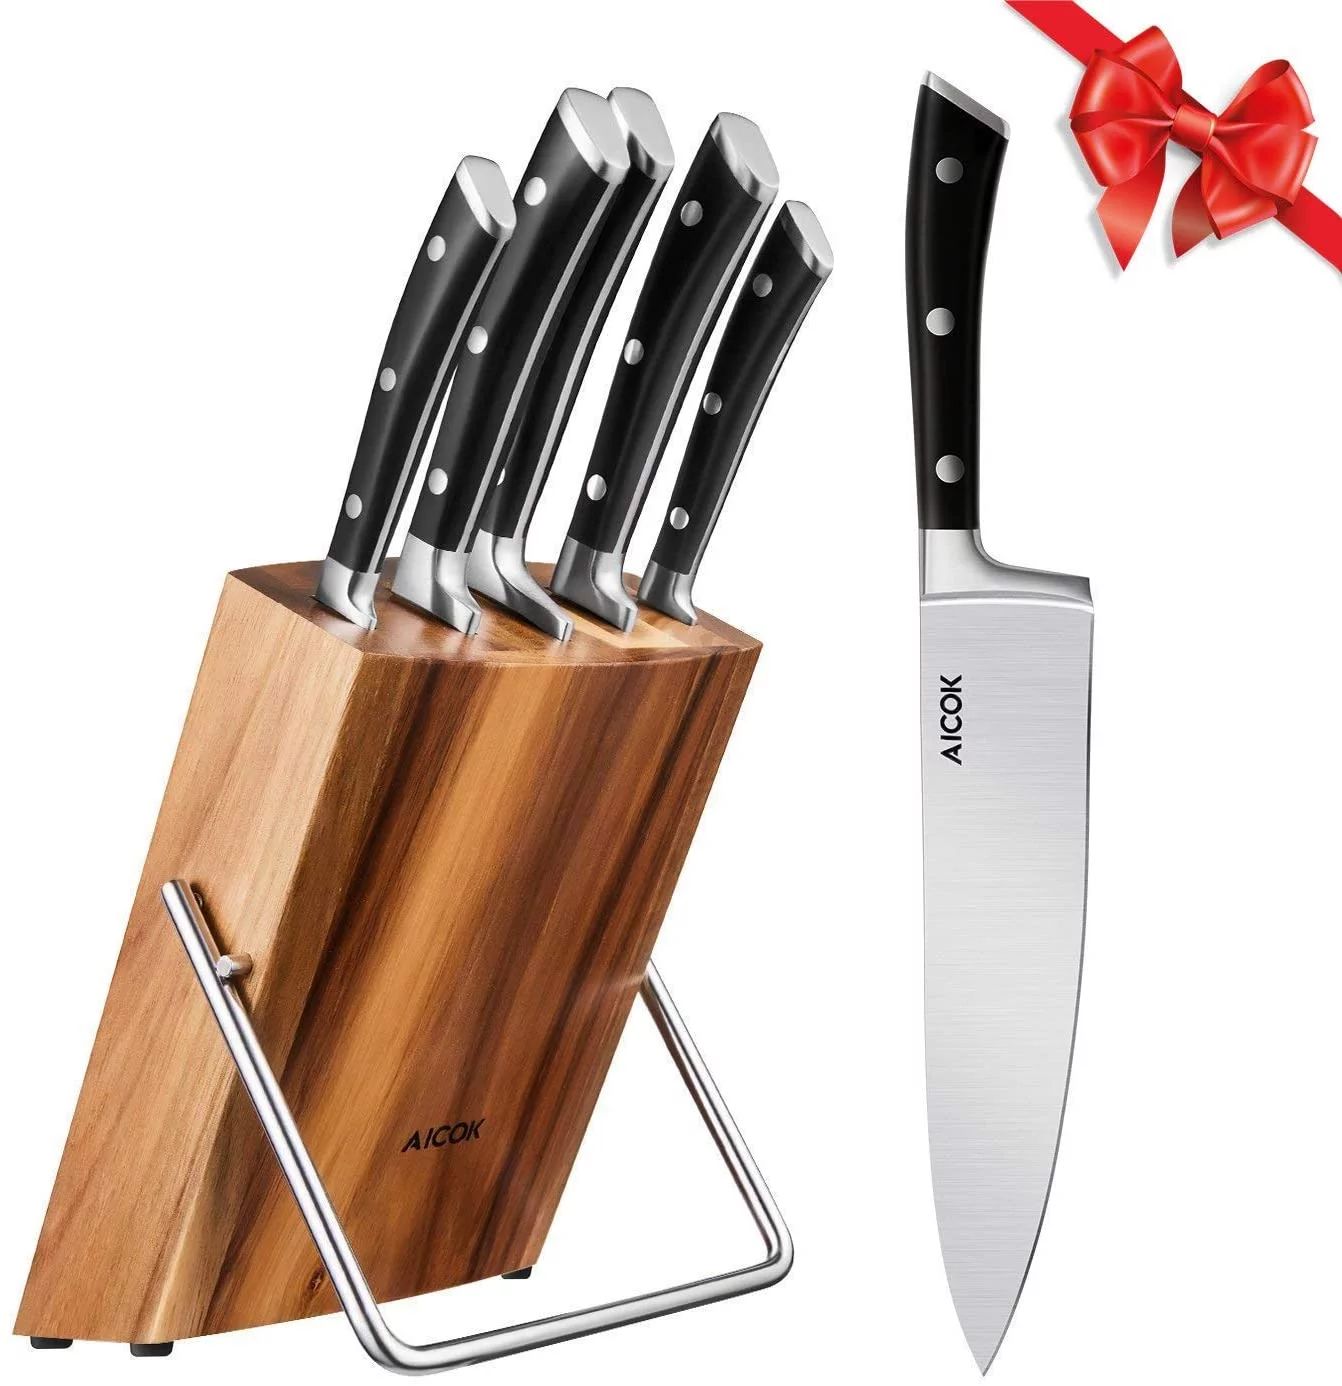 Aicok Knife Set, 6 Pieces German Stainless Steel Small Kitchen Knife Set with Wooden Block, Cutle... | Walmart (US)